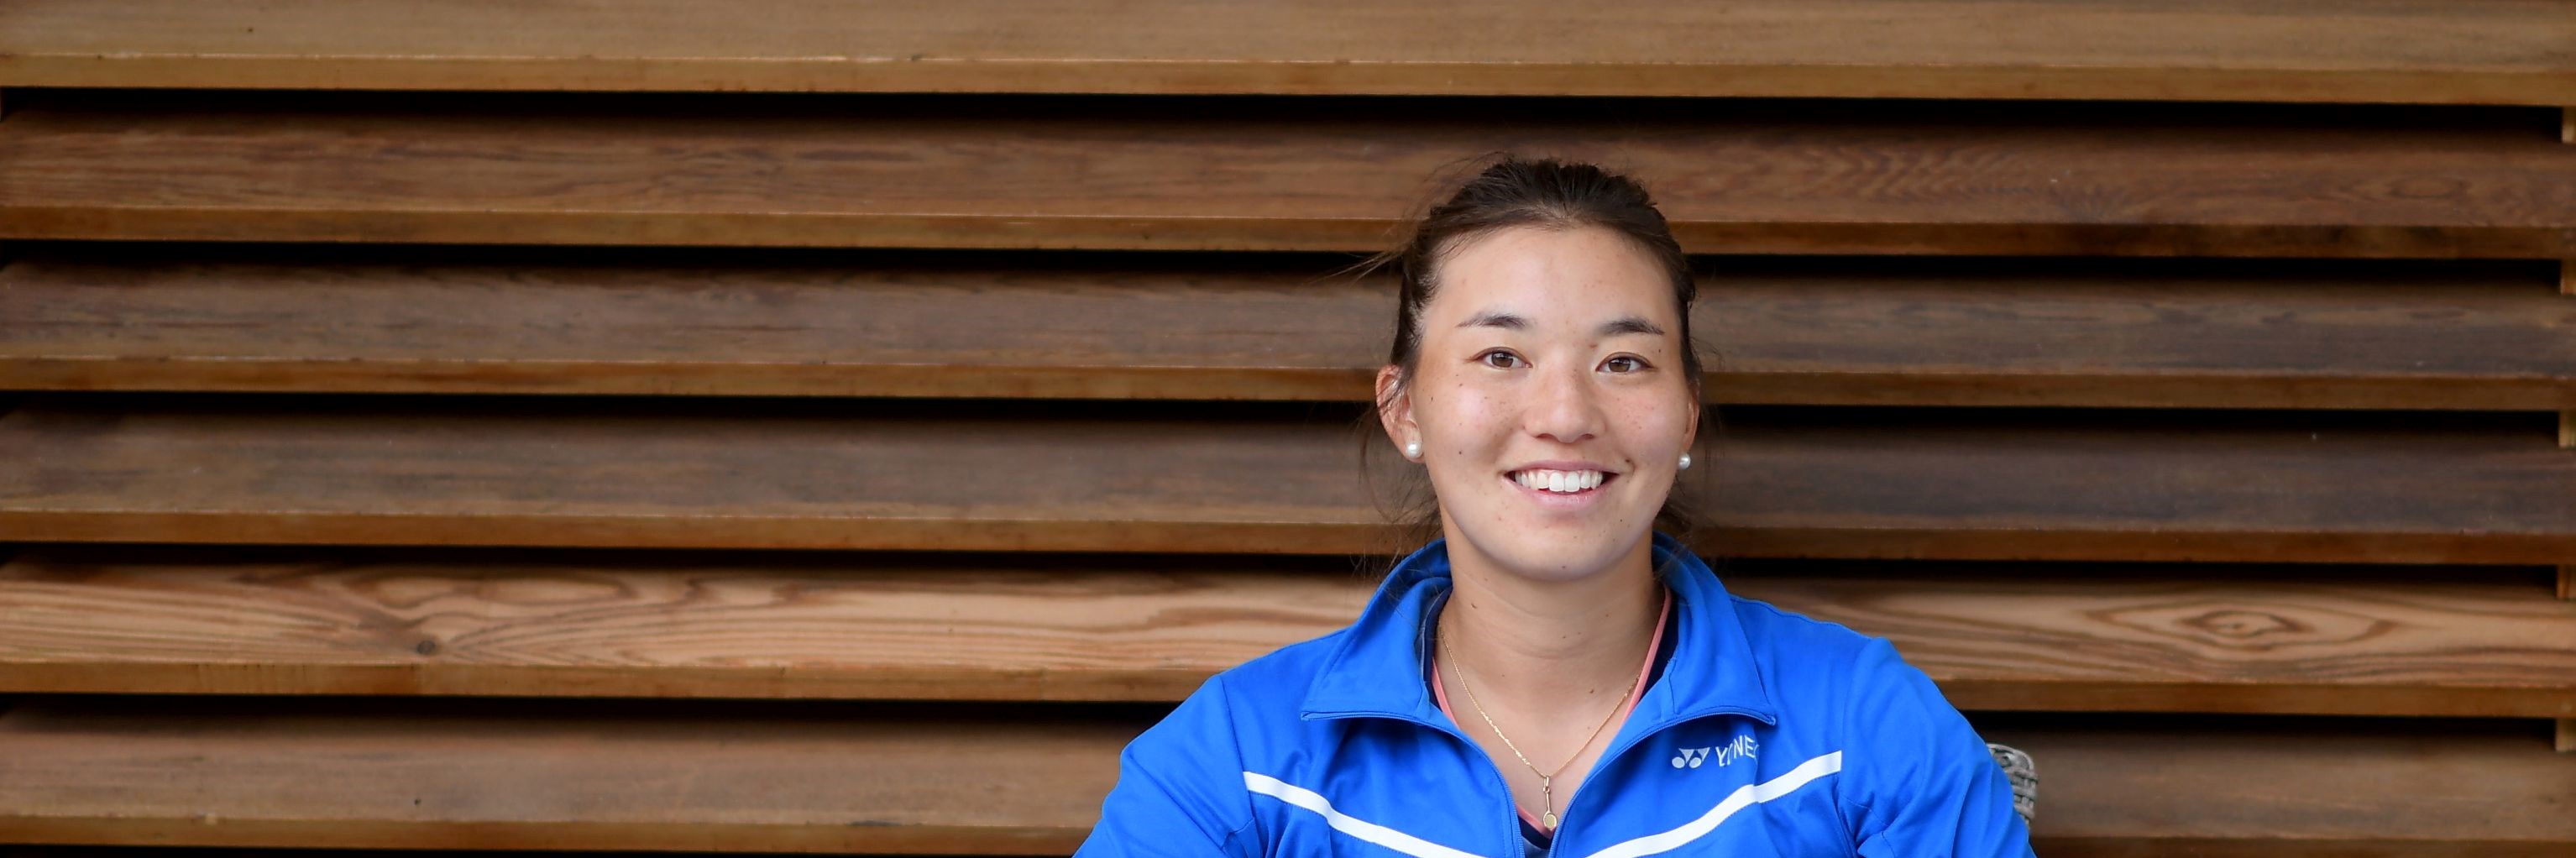 Lily Miyazaki smiling off court at the British Tour tournament at the National Tennis Centre